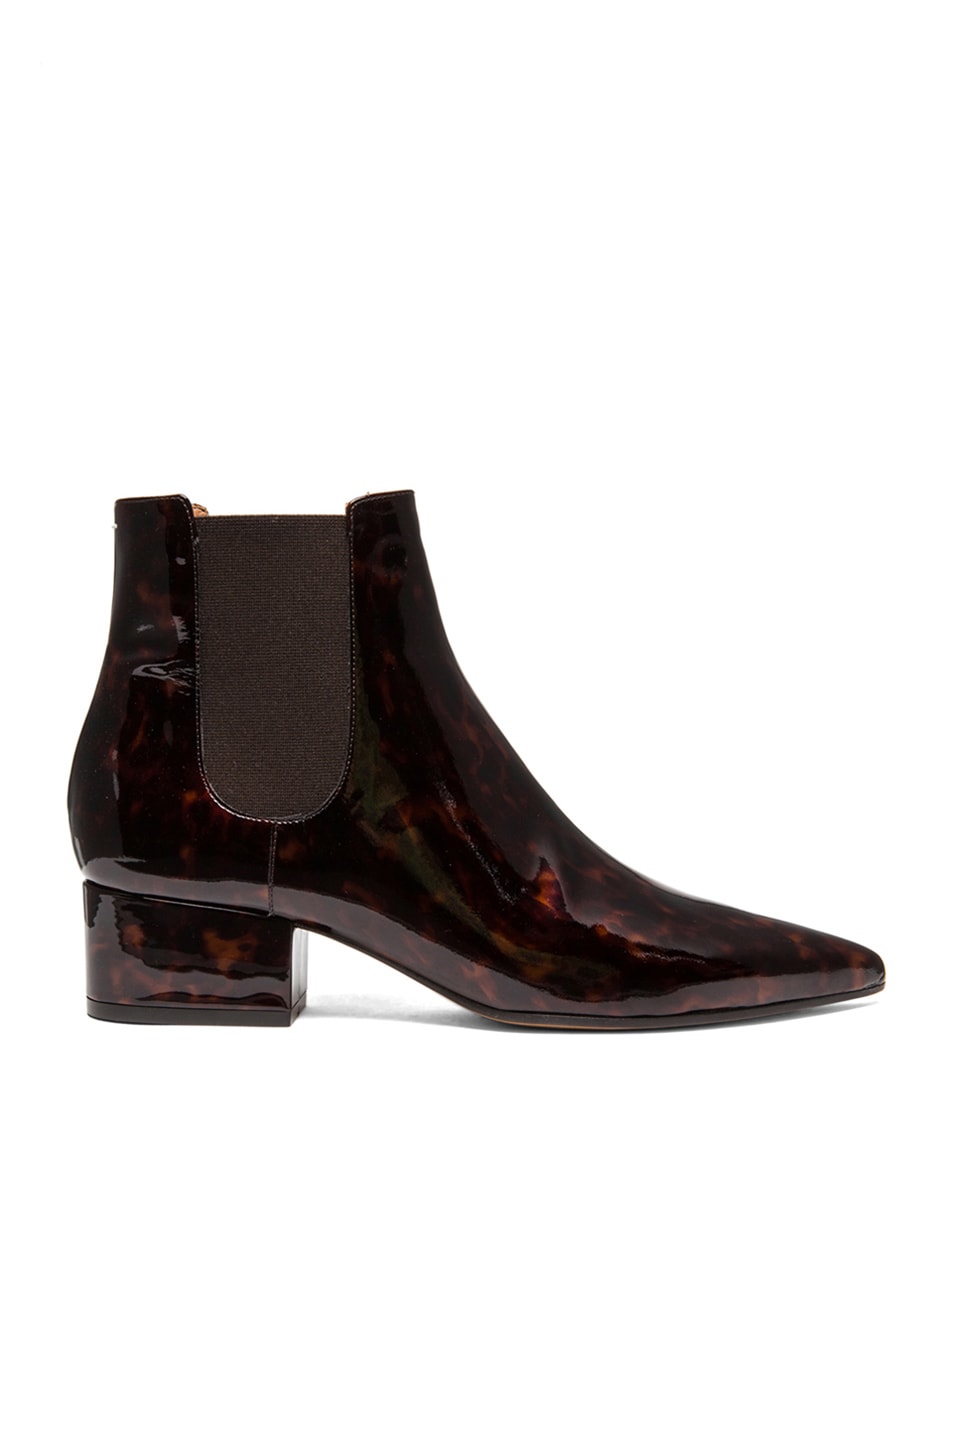 Image 1 of Maison Margiela Printed Patent Leather Chelsea Boots in Turtle